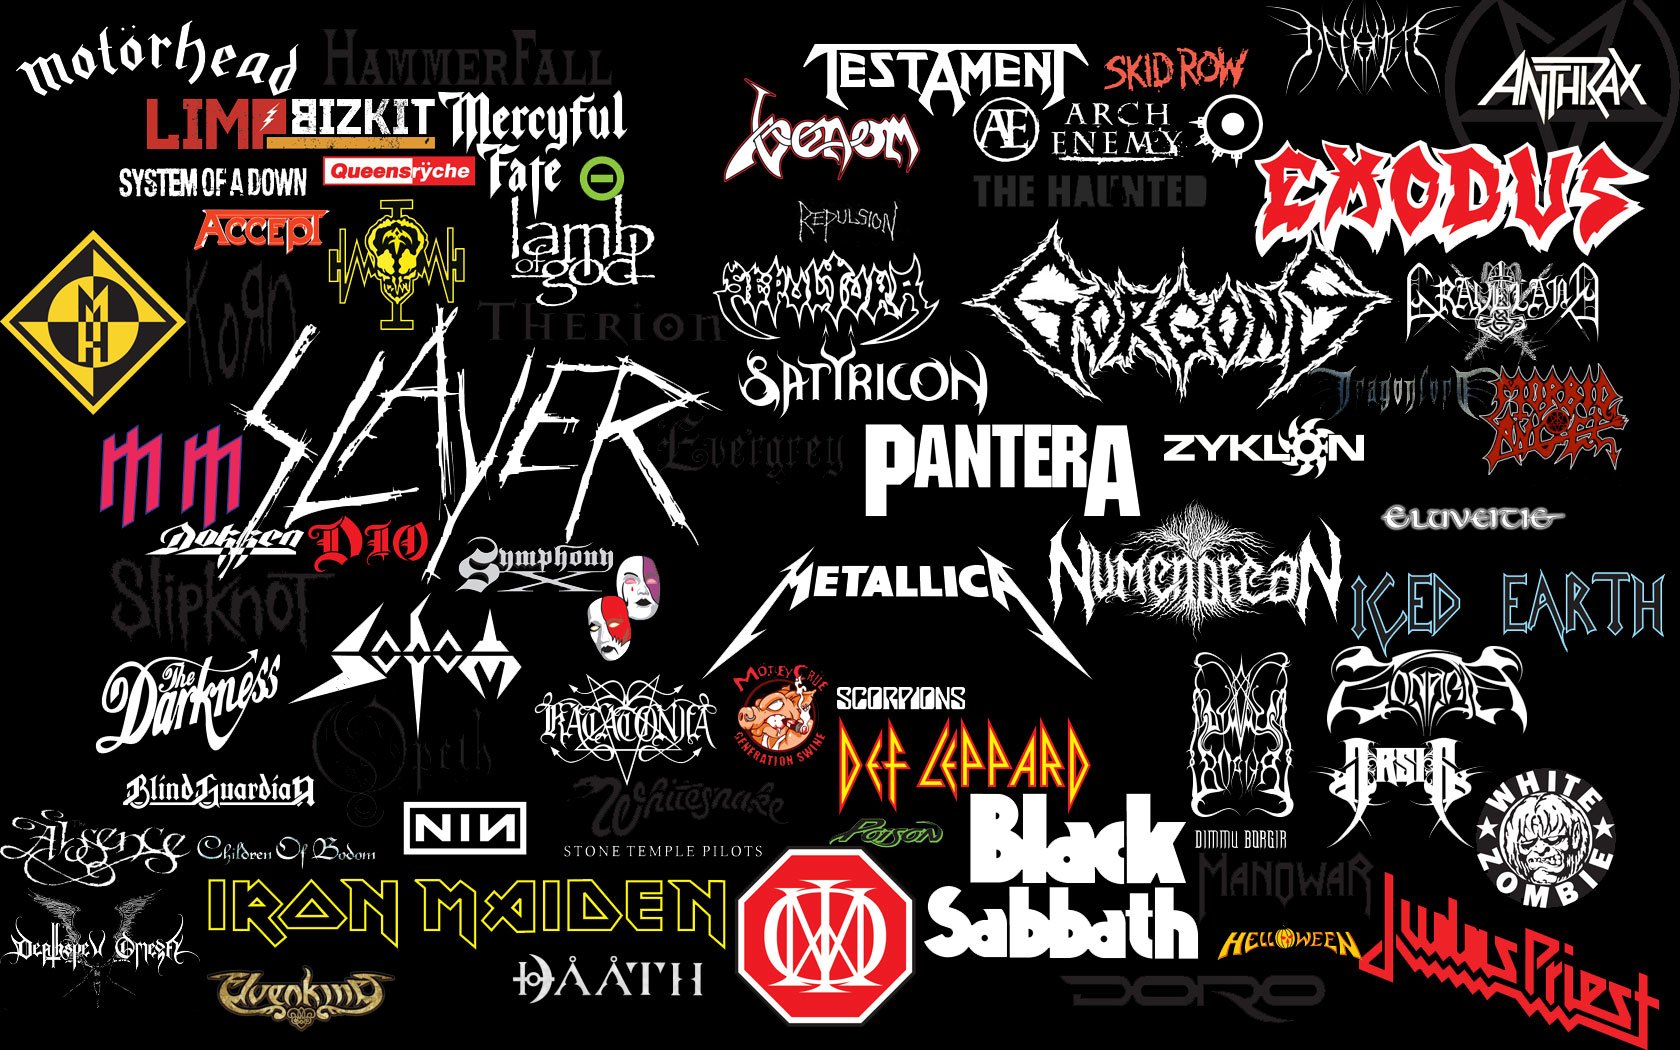 Metal music backgrounds